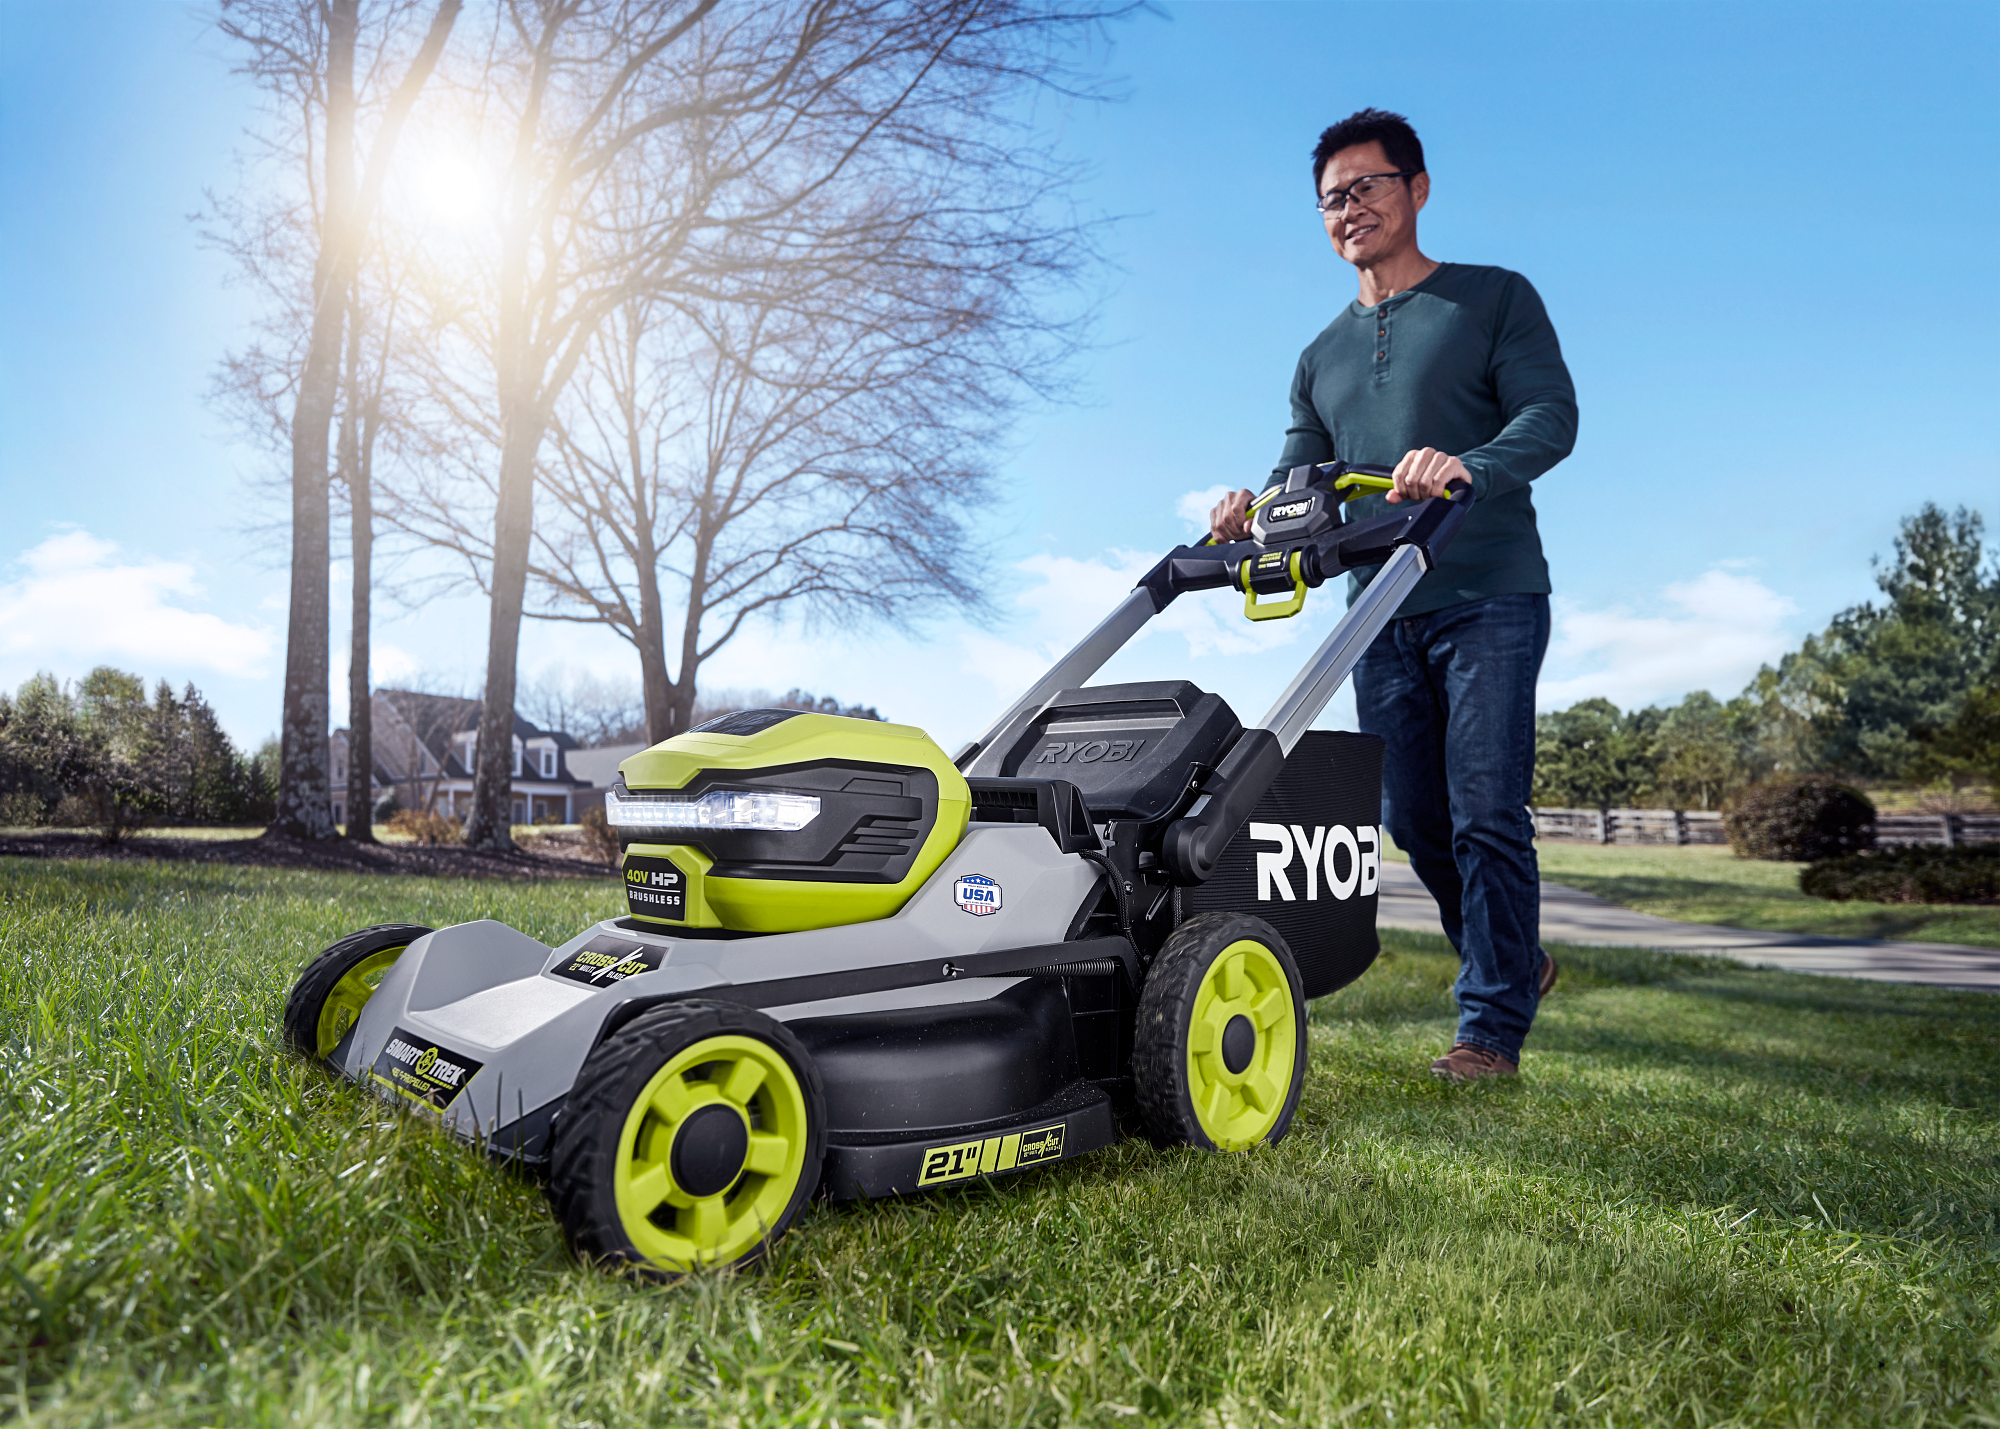 Product Features Image for 40V HP BRUSHLESS 21" WALK BEHIND LAWN MOWER KIT.